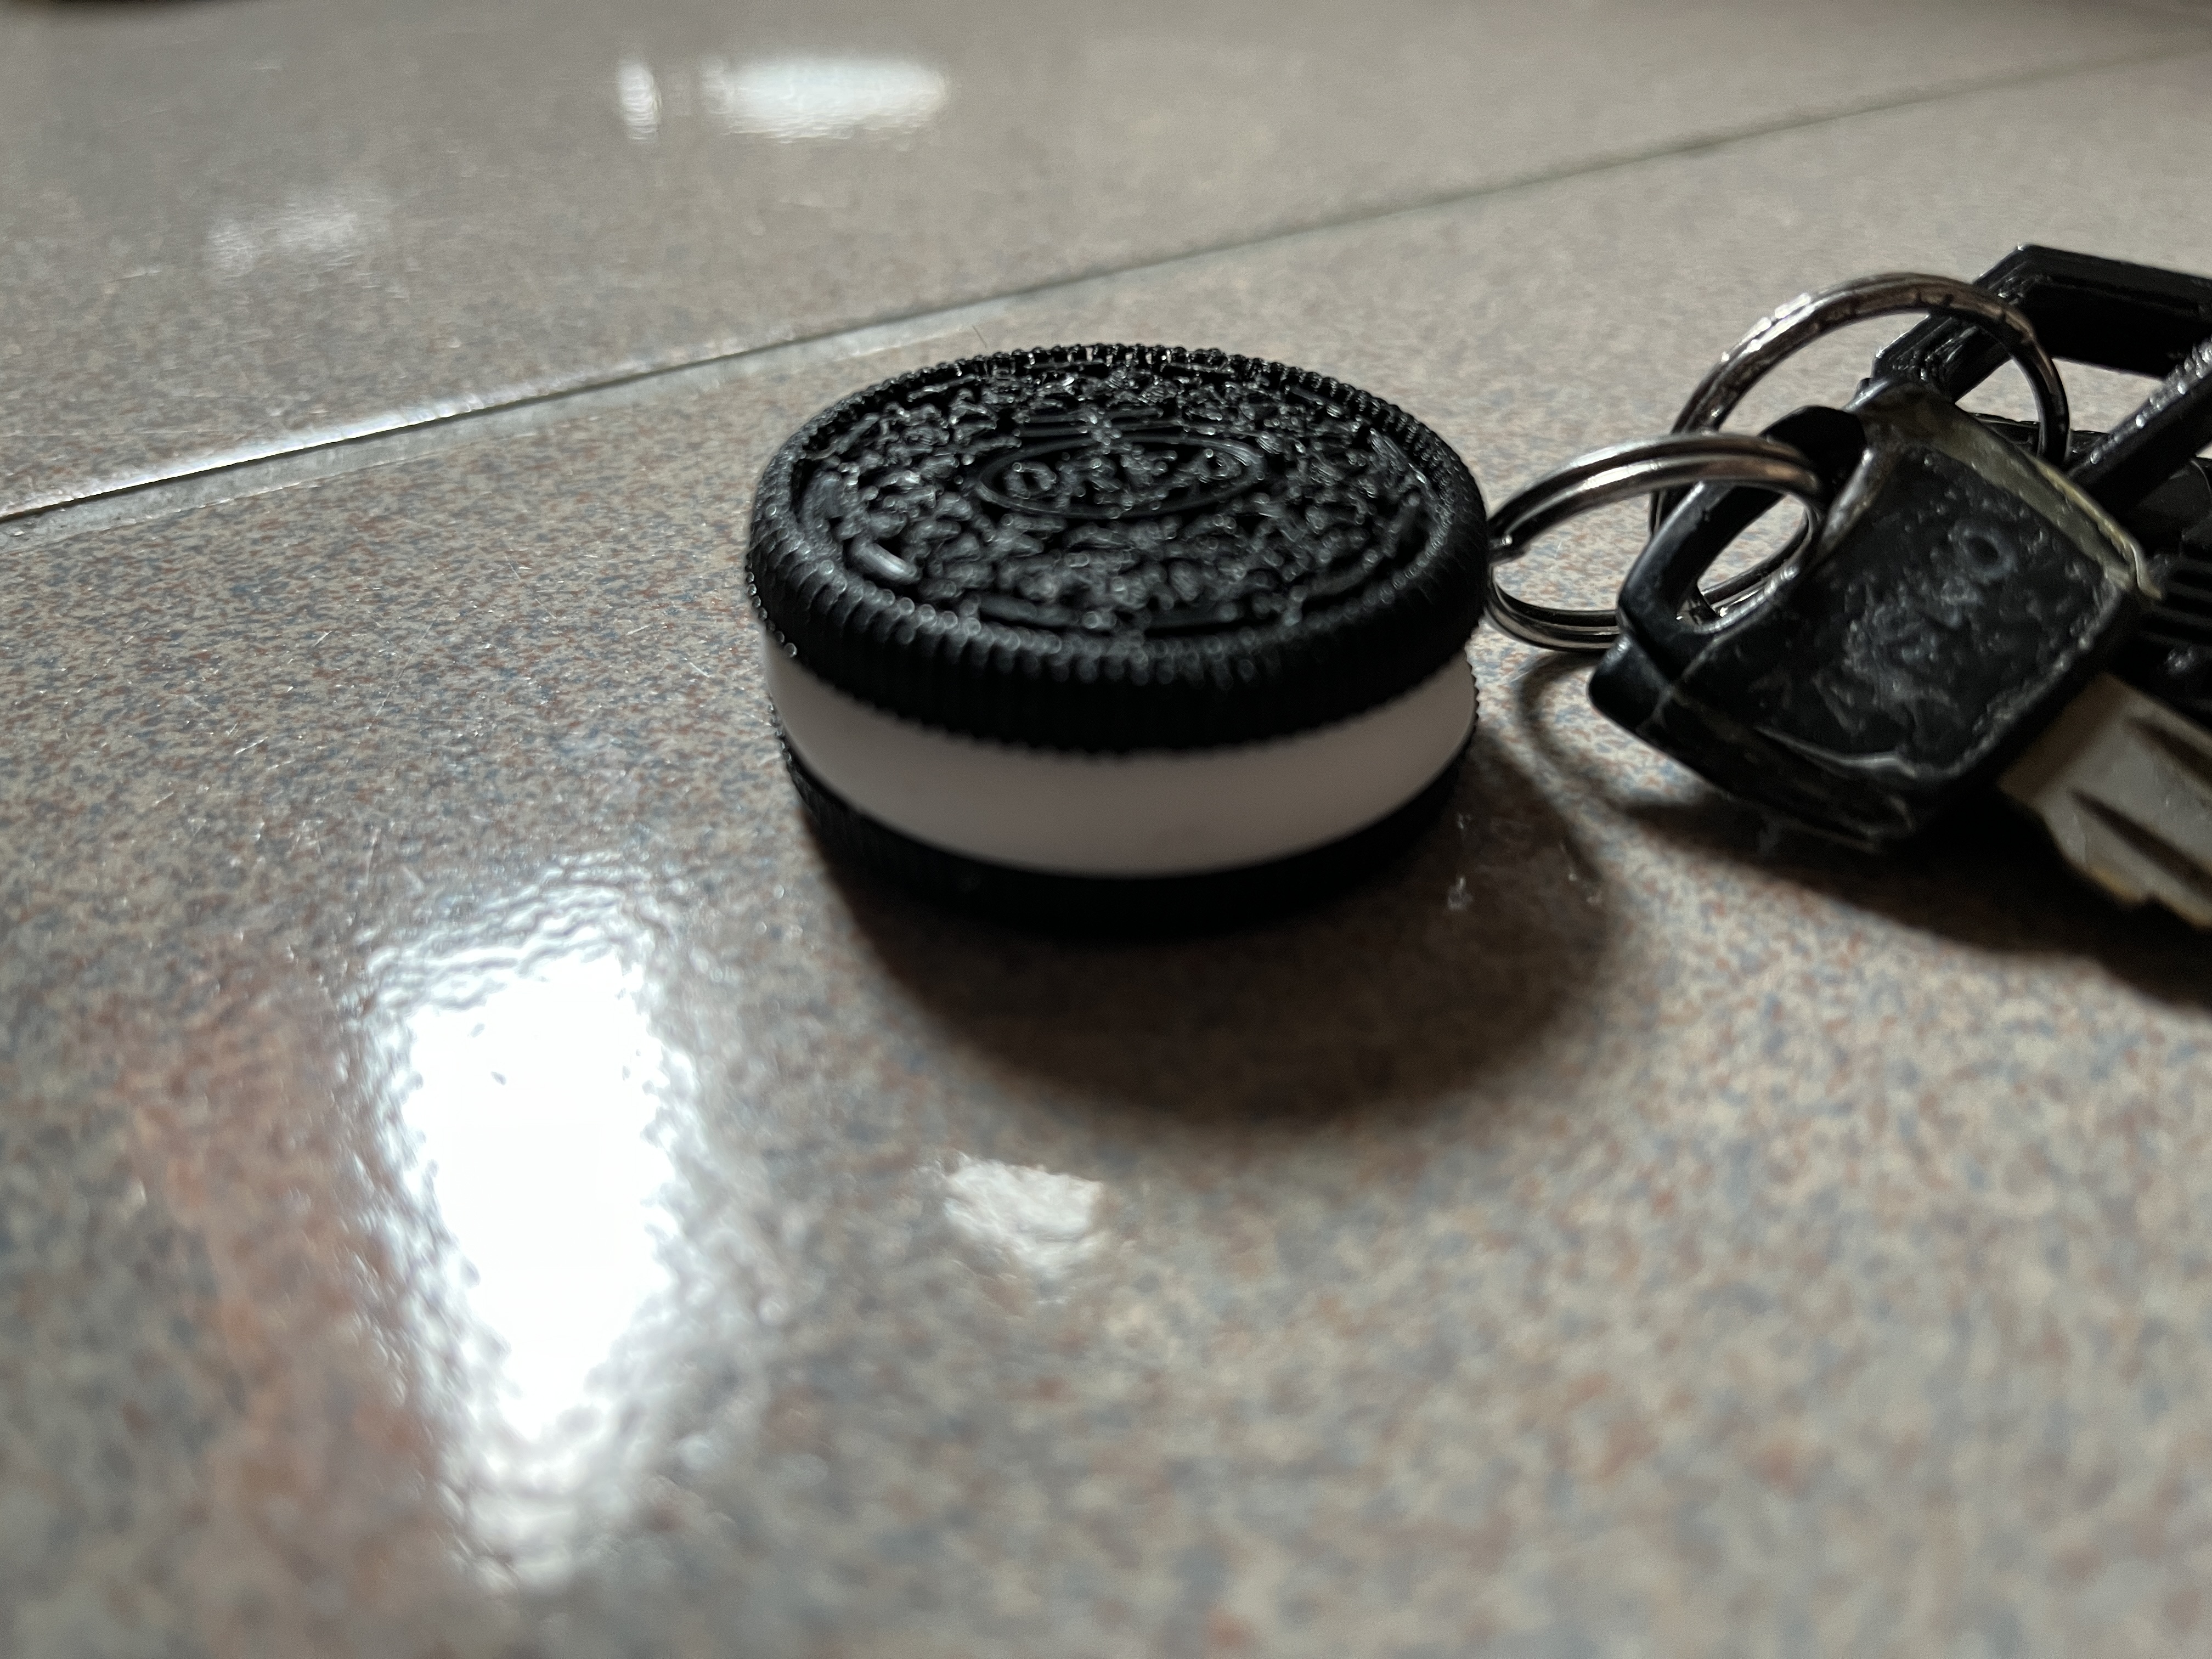 Oreo cookie mold by Frank Huang